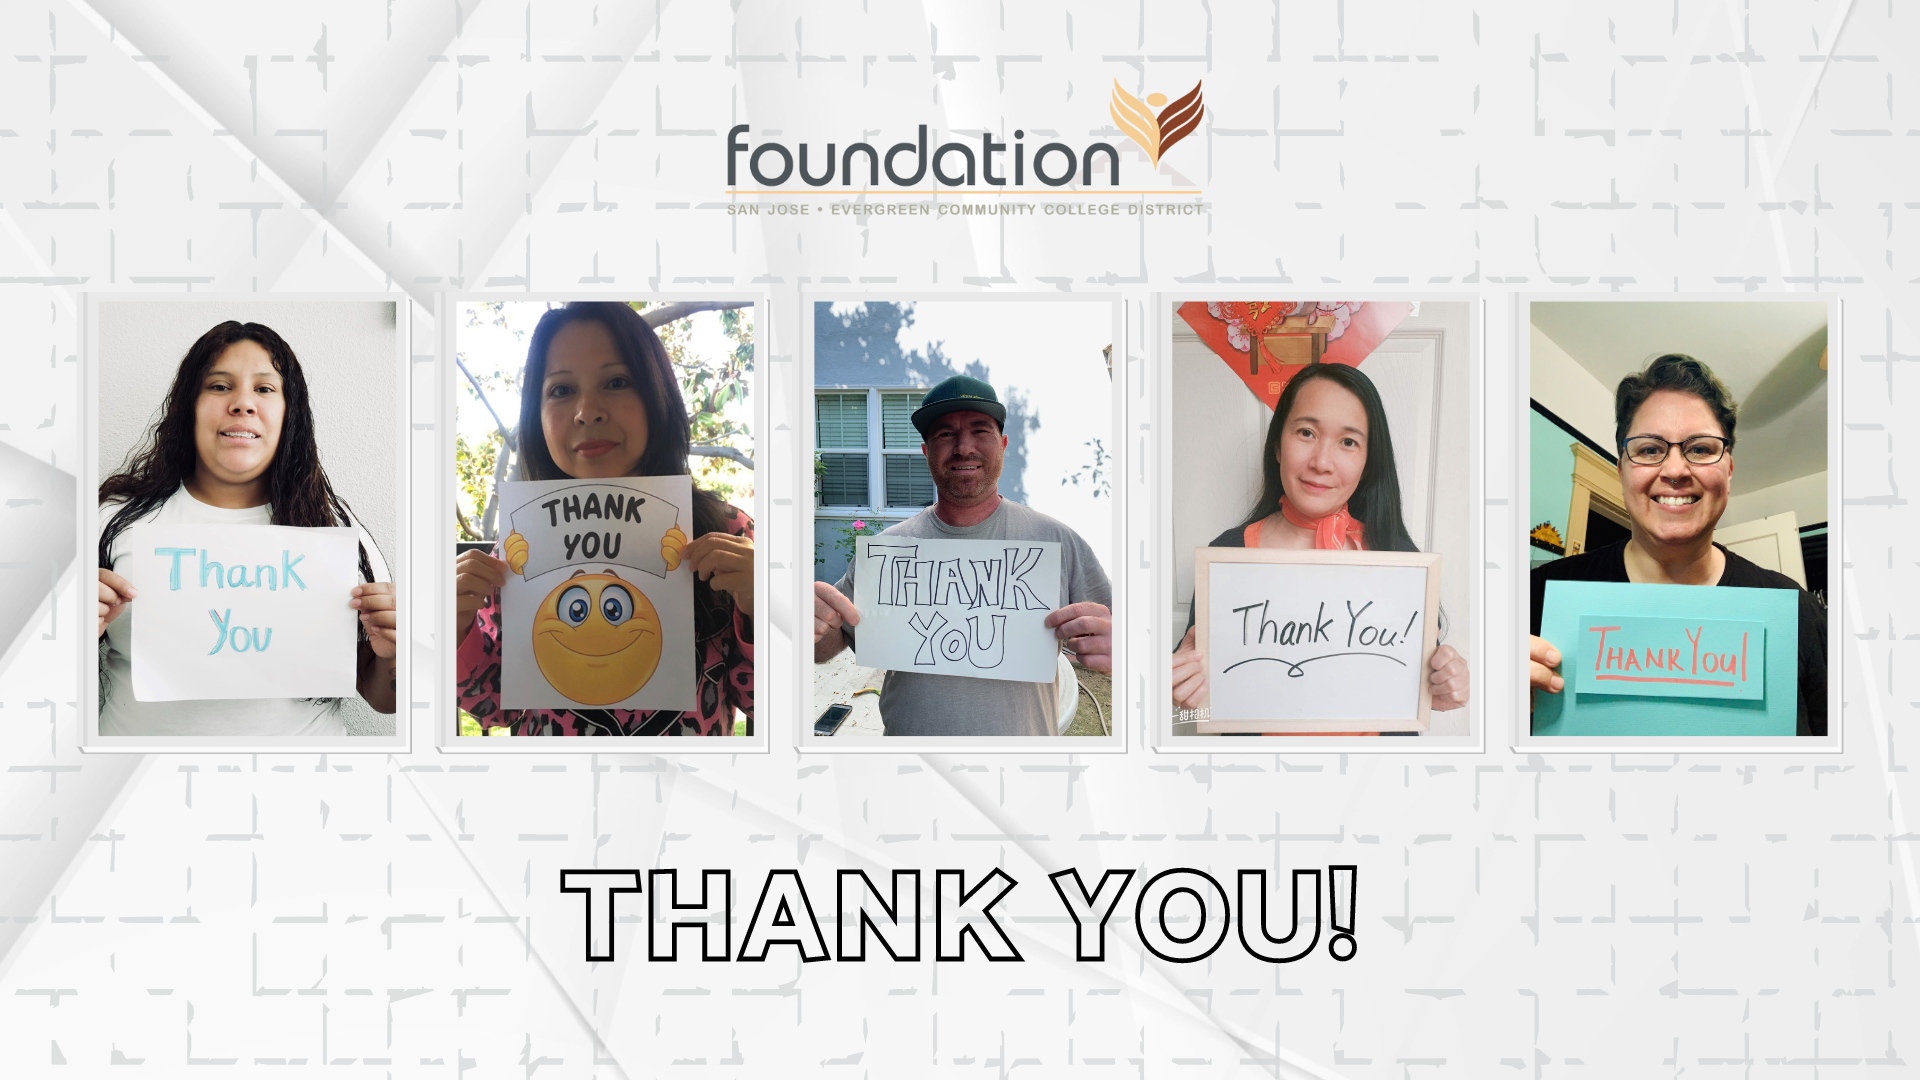 5 students from San Jose City College and Evergreen Valley College holding up a "Thank You" sign with the Foundation logo displayed at the top of the whole image. 